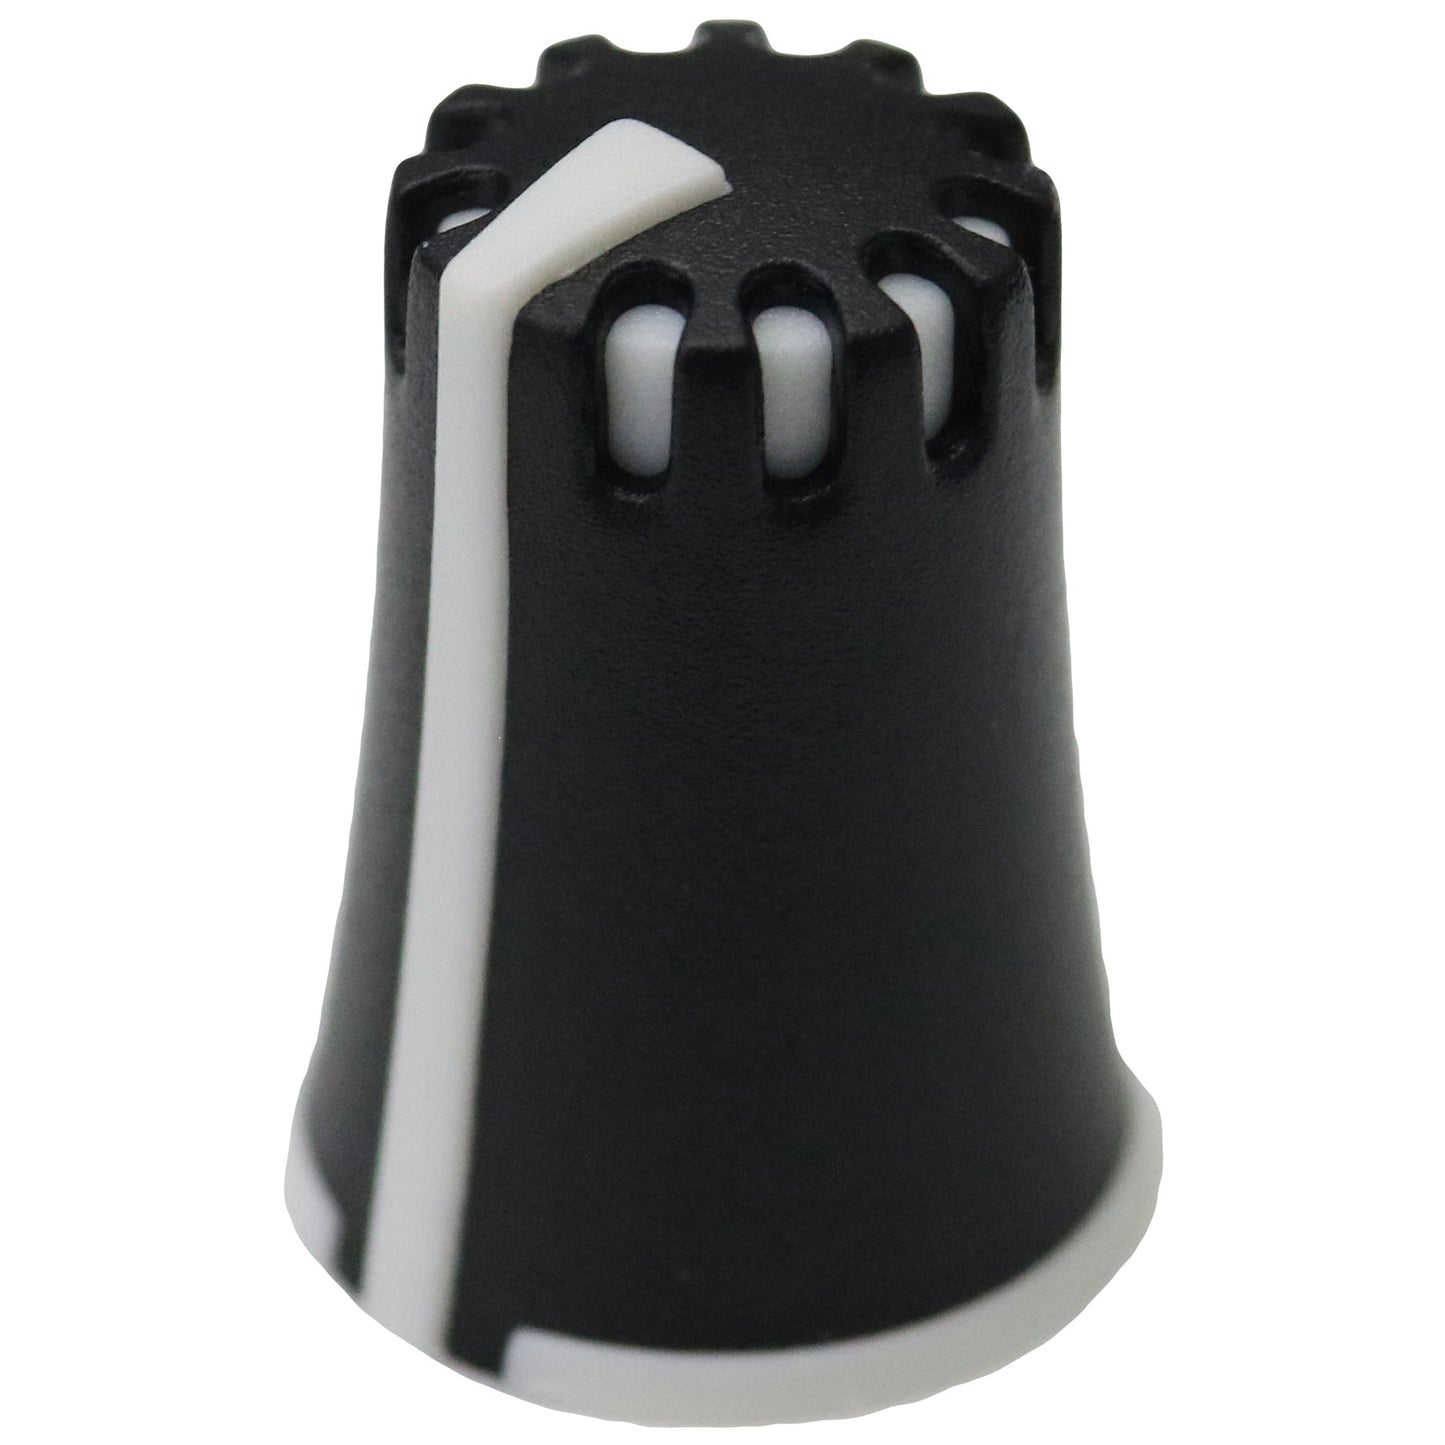 Smooth Castle Top Plastic Control Knobs